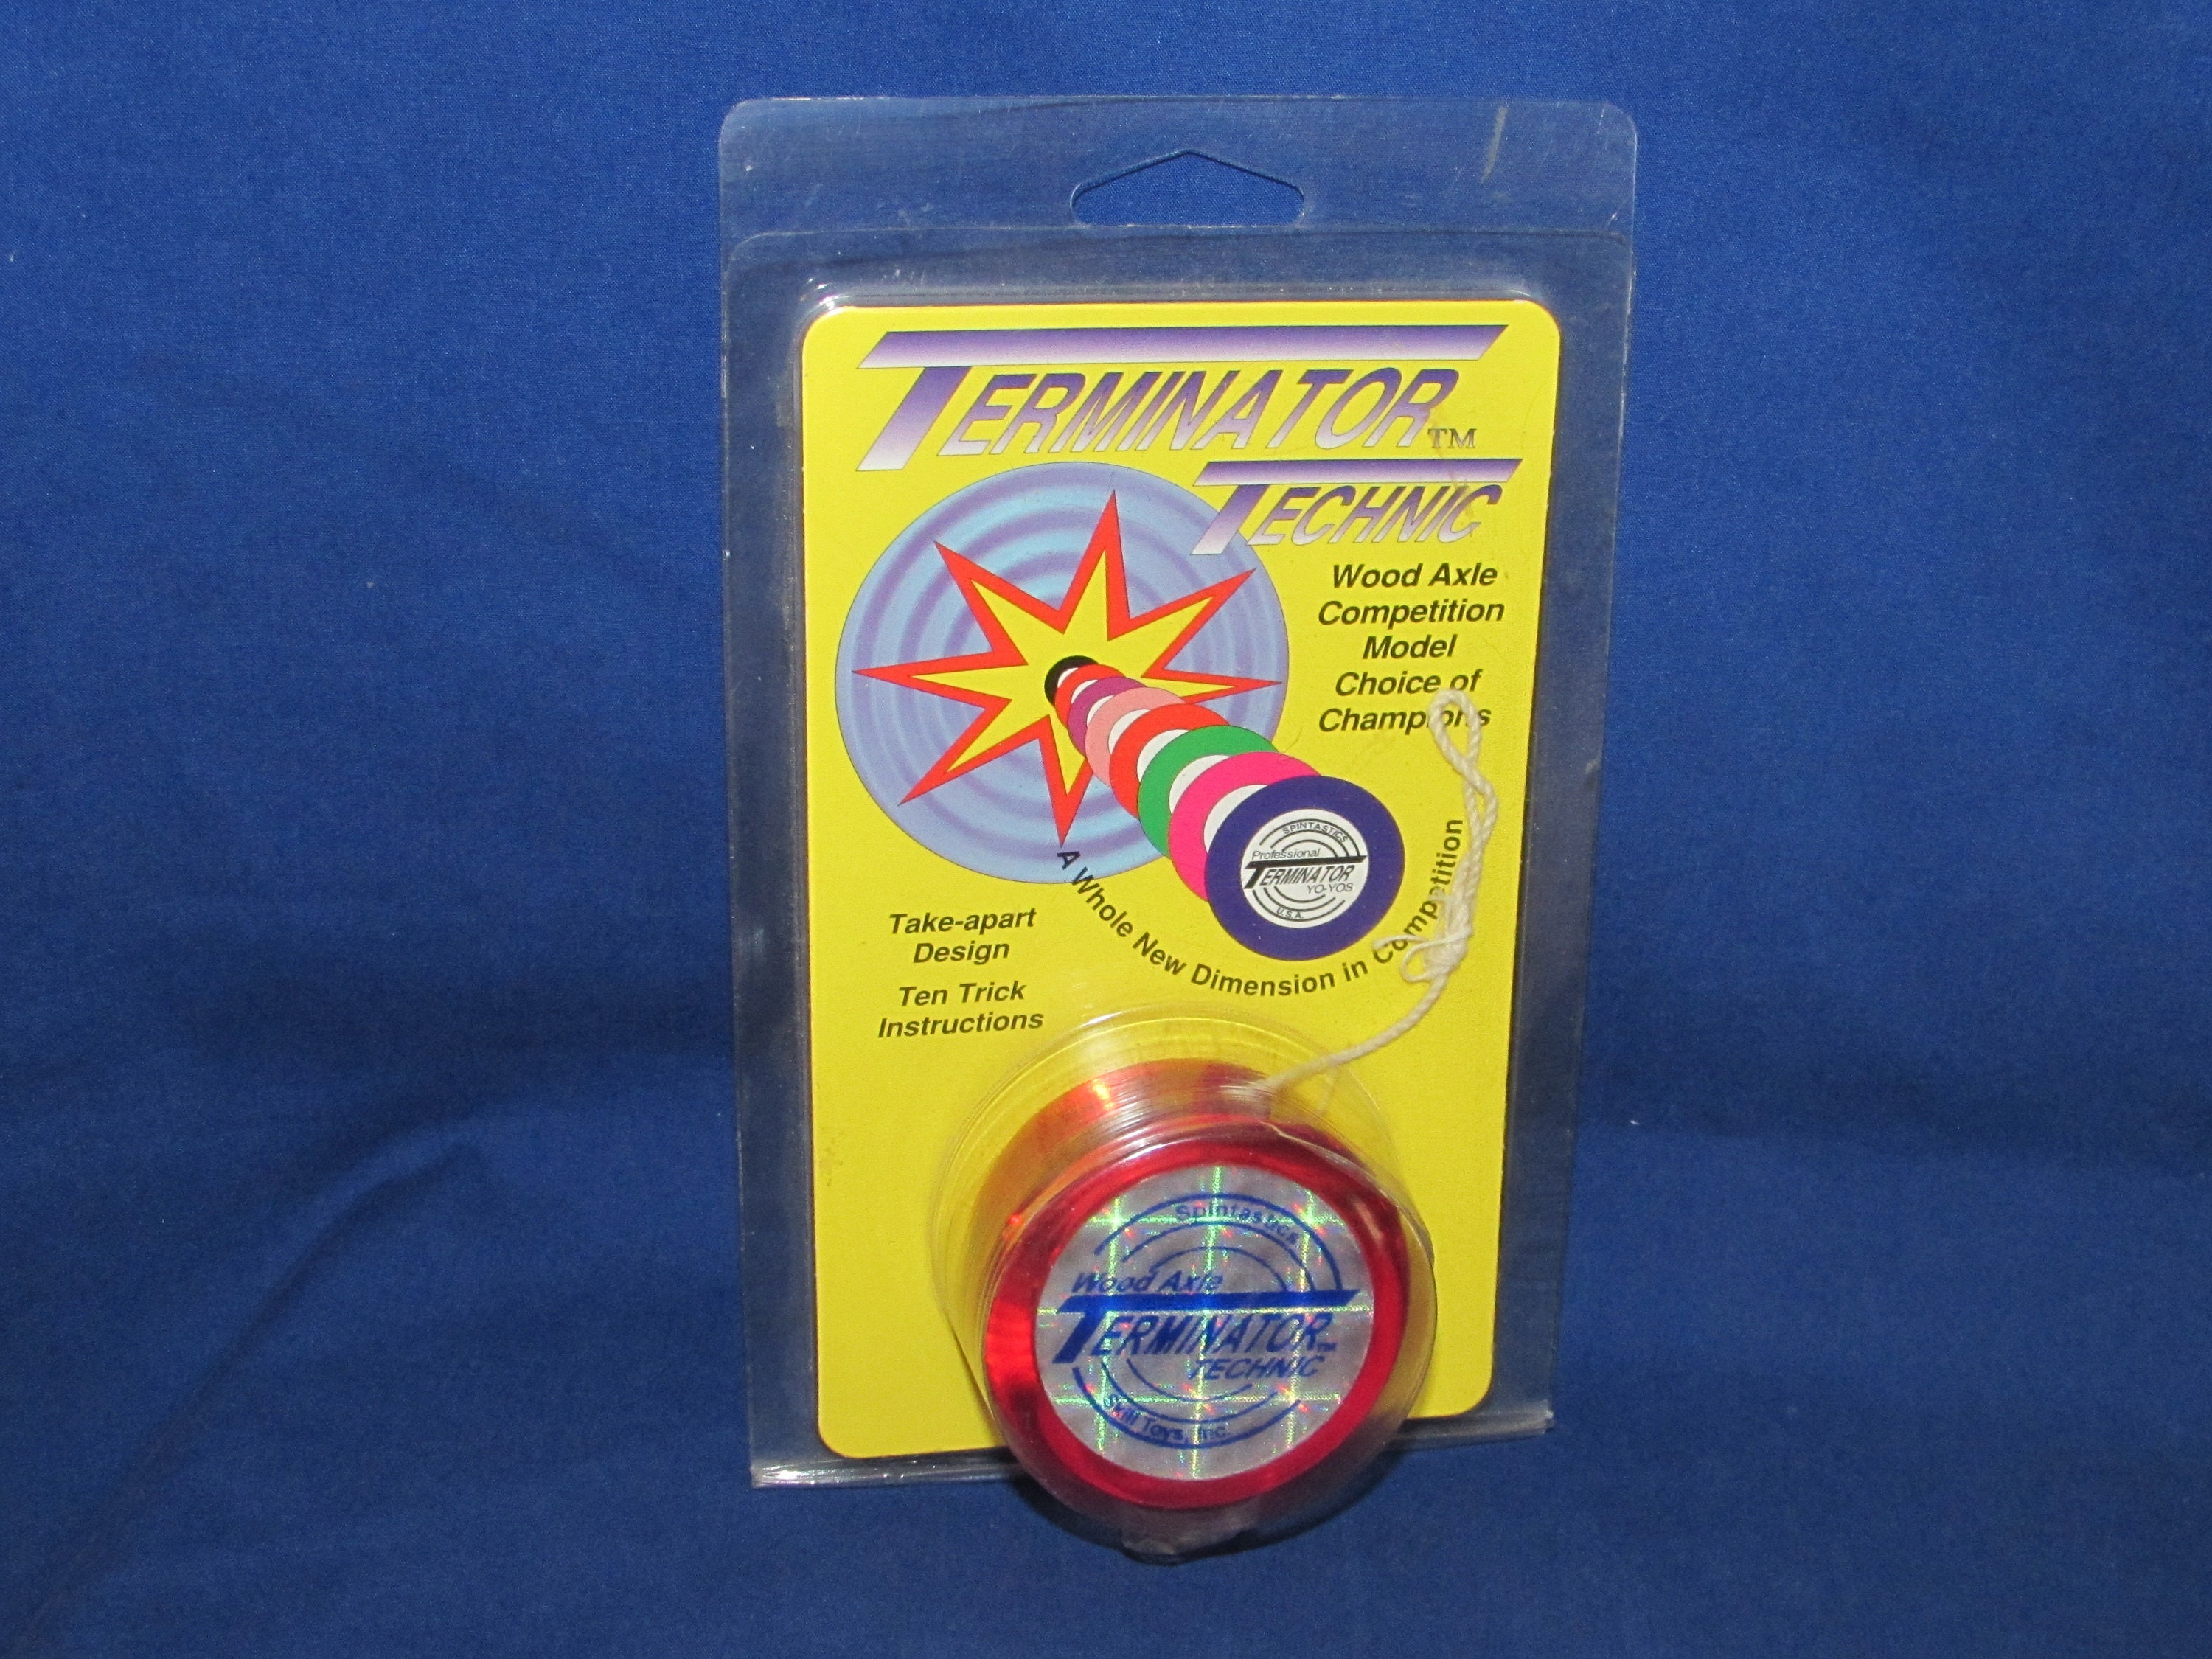 Vintage Spintastics Professional terminator yoyo replacement strings pack of 5 